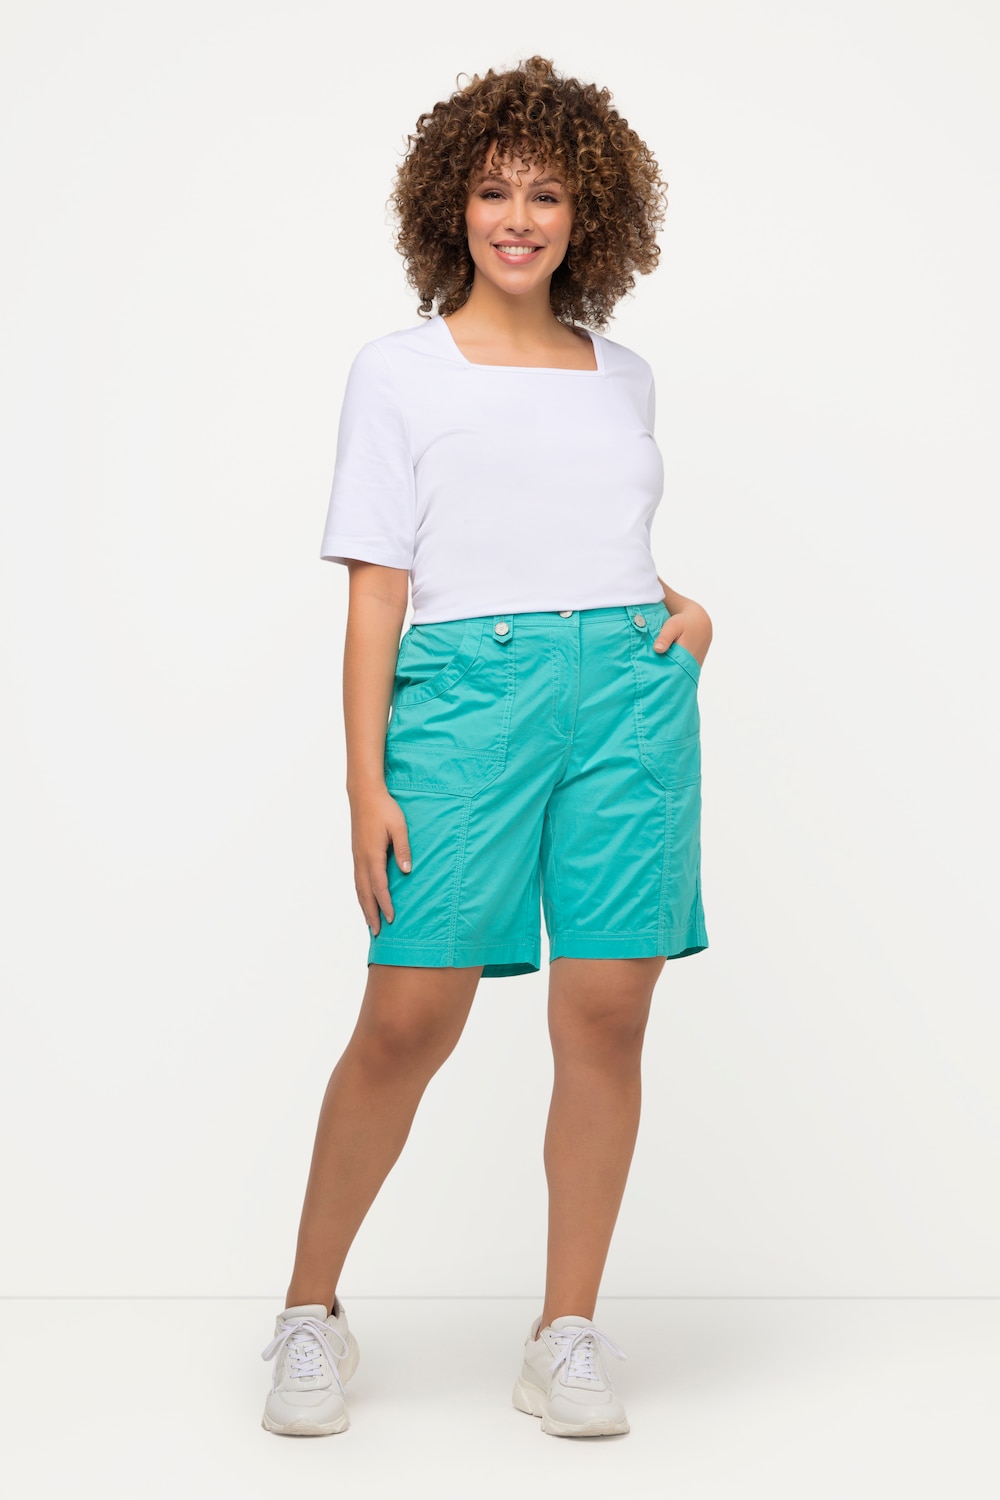 grandes tailles bermuda style cargo 4 poches, femmes, turquoise, taille: 52, coton, ulla popken